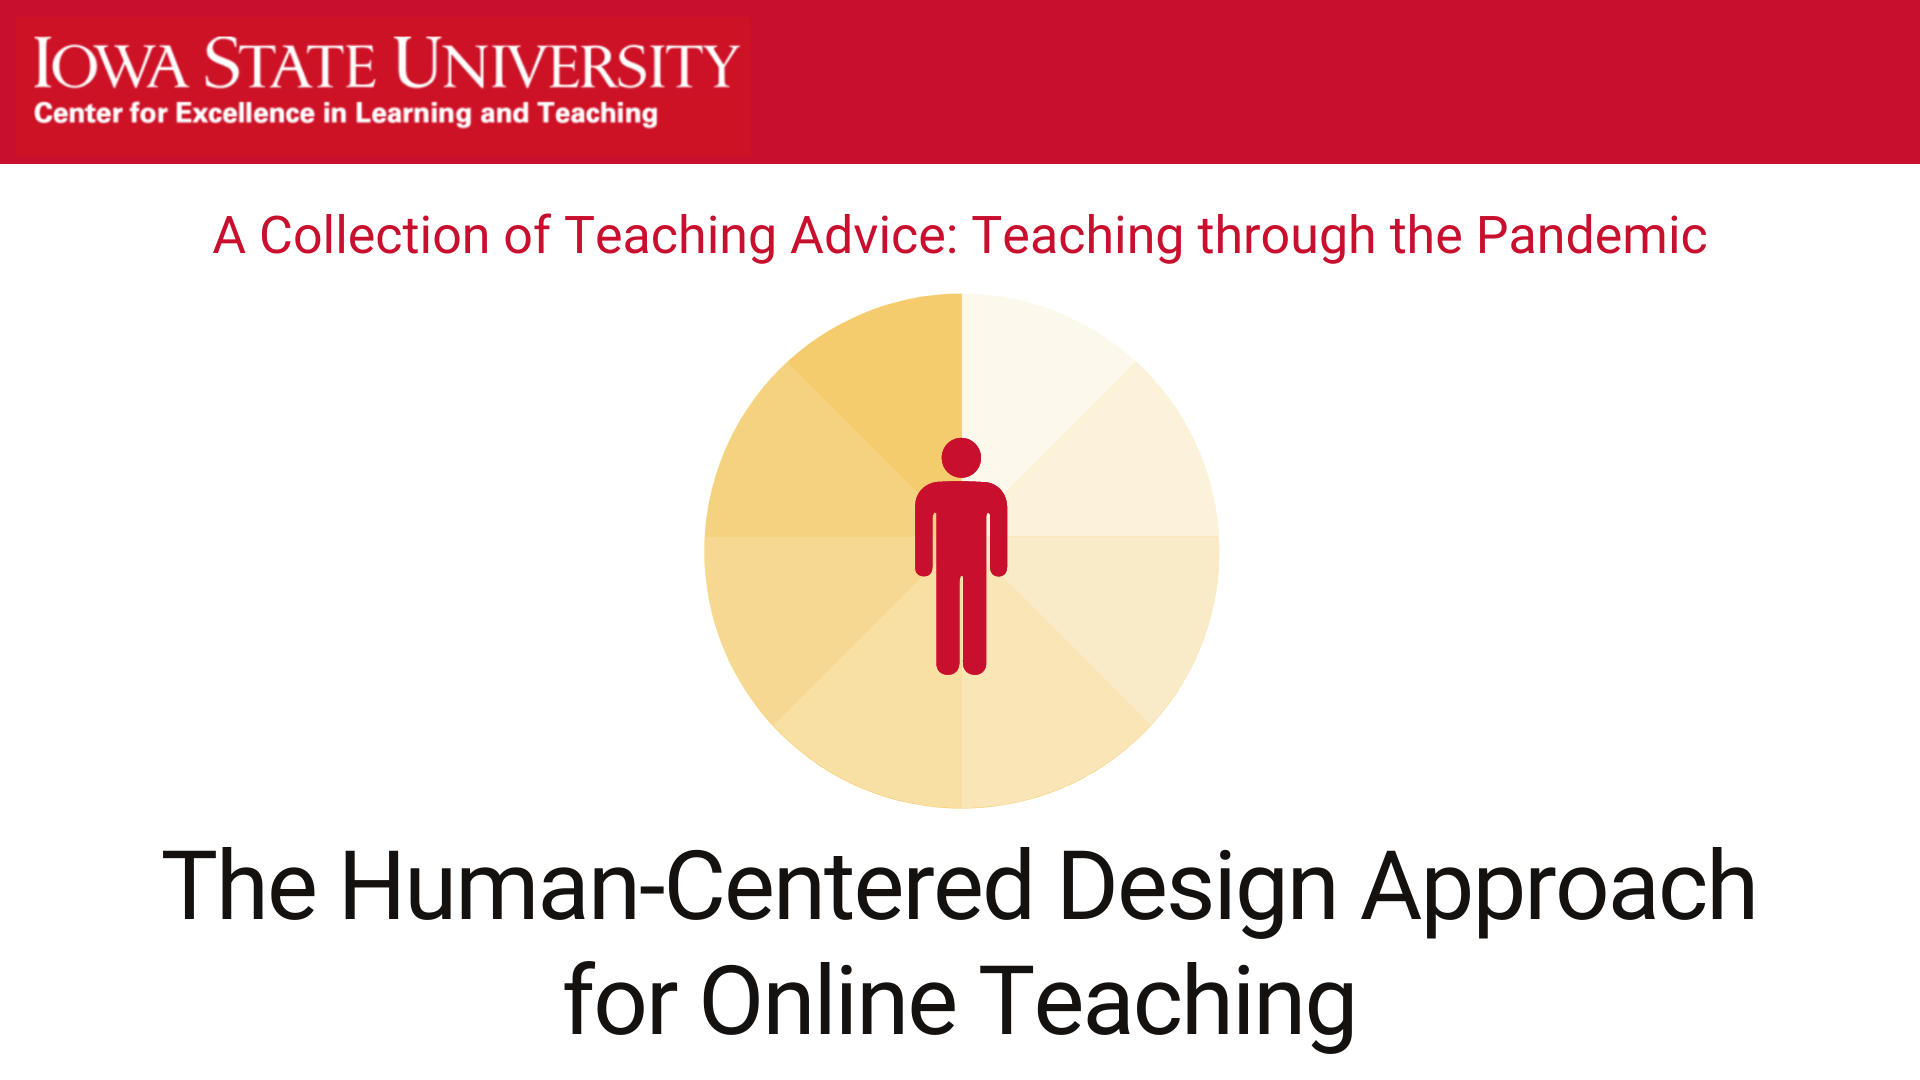 The Human-Centered Design Approach for Online Teaching, Baran and Alzoubi